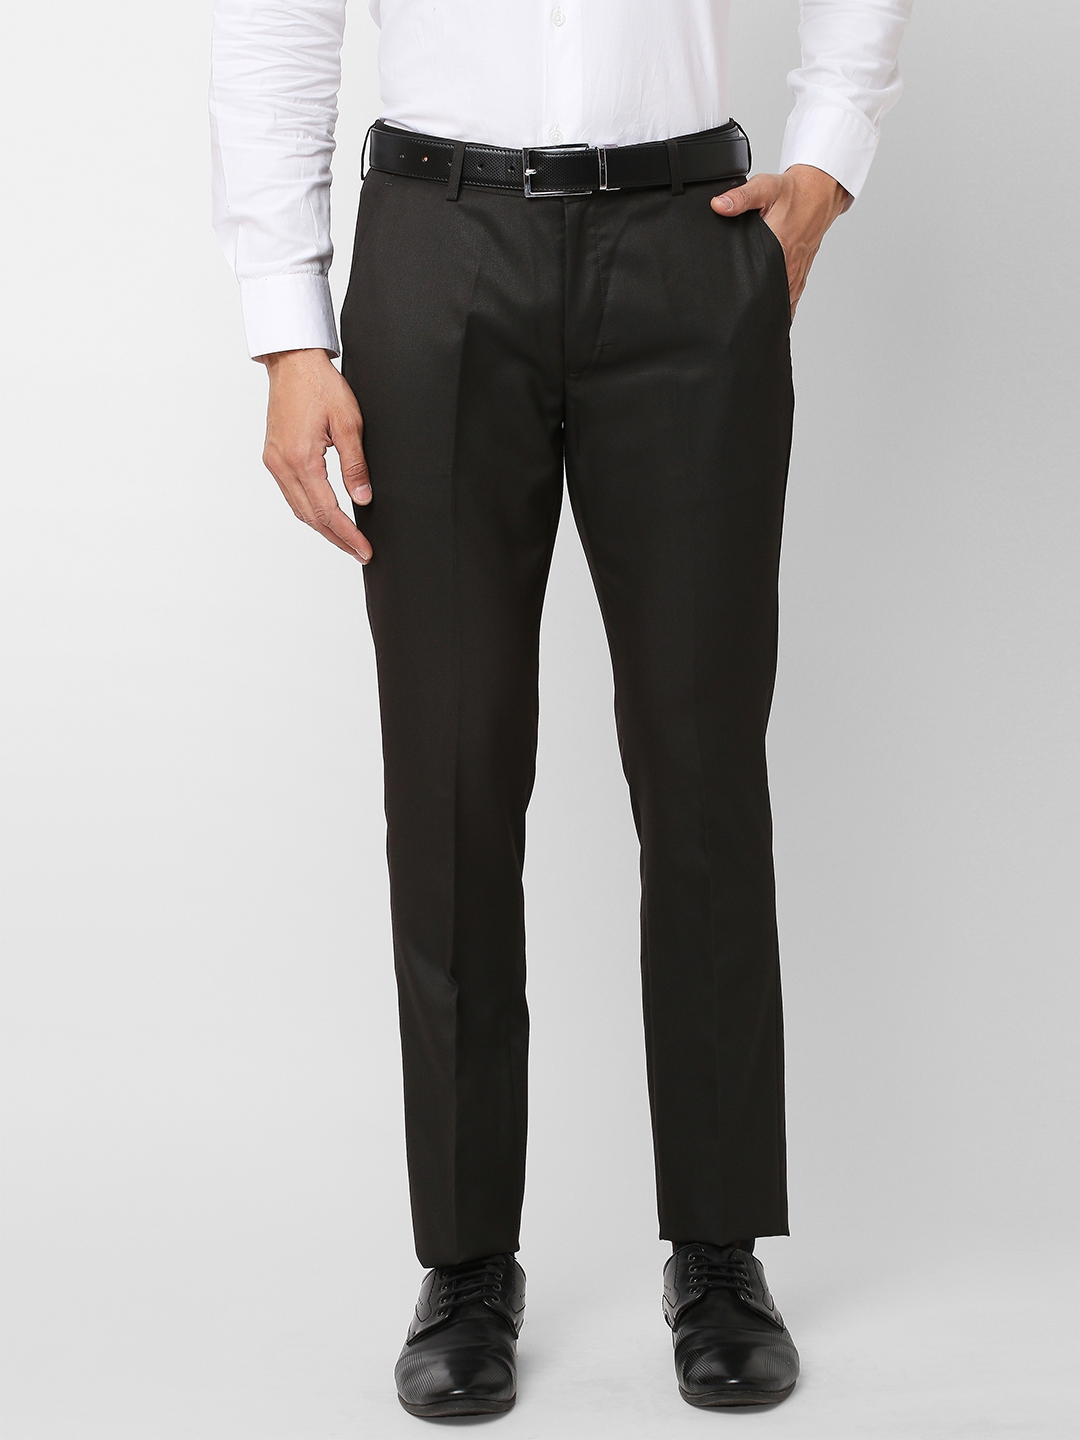 Buy LOUIS PHILIPPE Textured Polyester Lycra Slim Fit Mens Trousers   Shoppers Stop